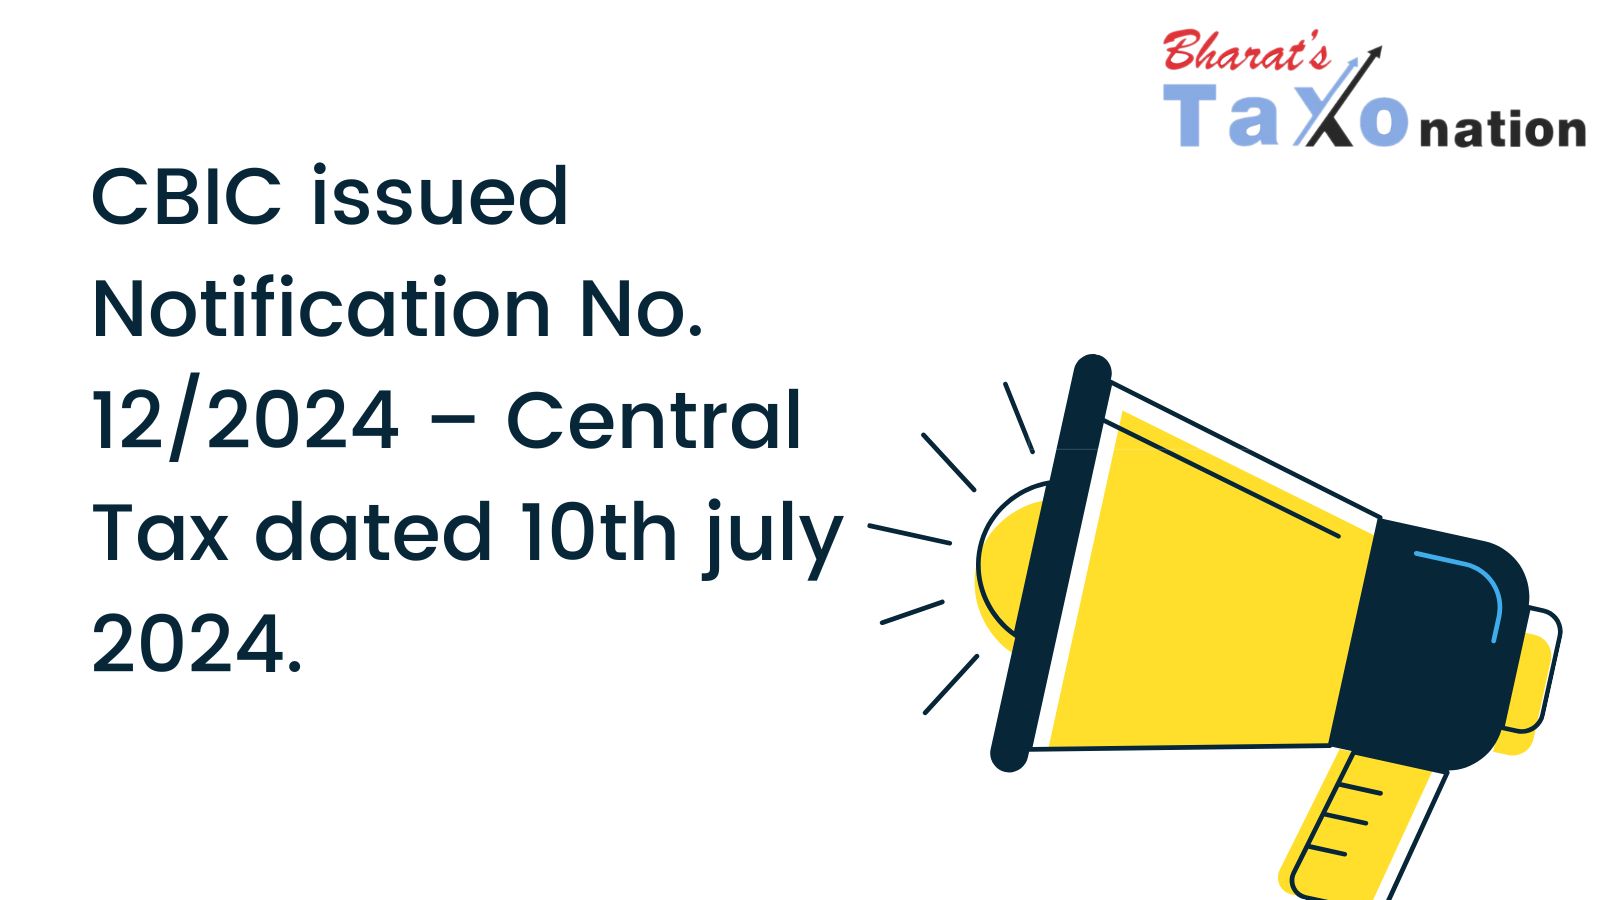 CBIC issued notification No. 12/2024 – Central Tax dated 10th july 2024.